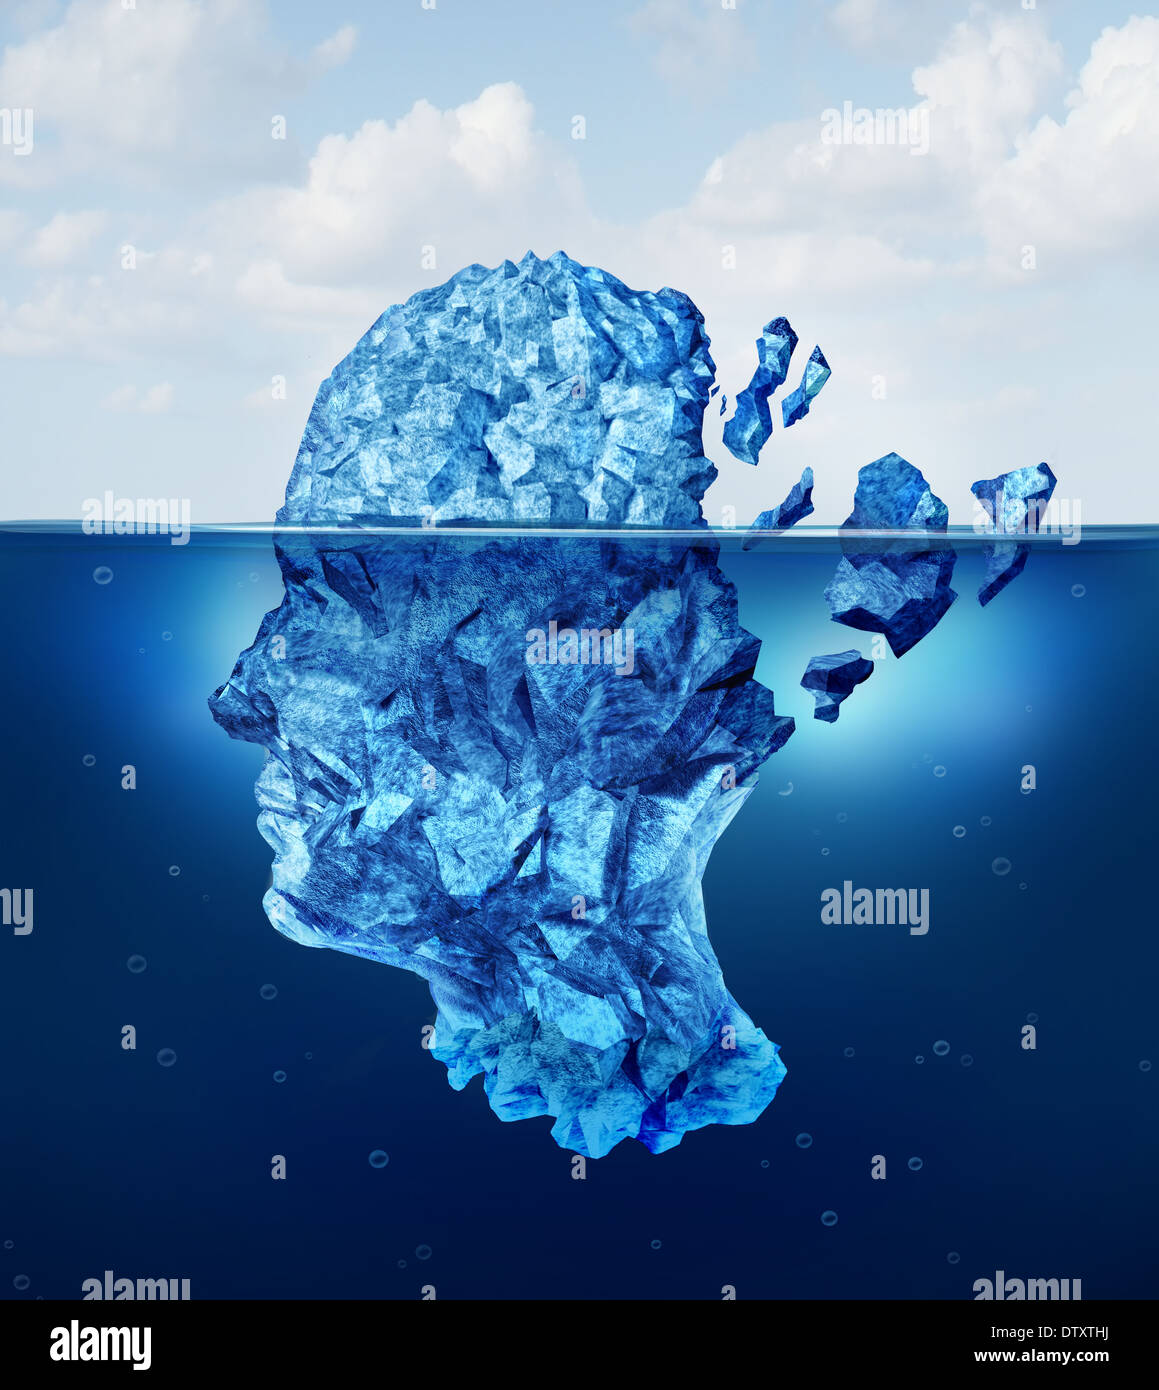 Brain trauma and aging or neurological damage concept as an iceberg floating in an ocean breaking apart as a health crisis metap Stock Photo